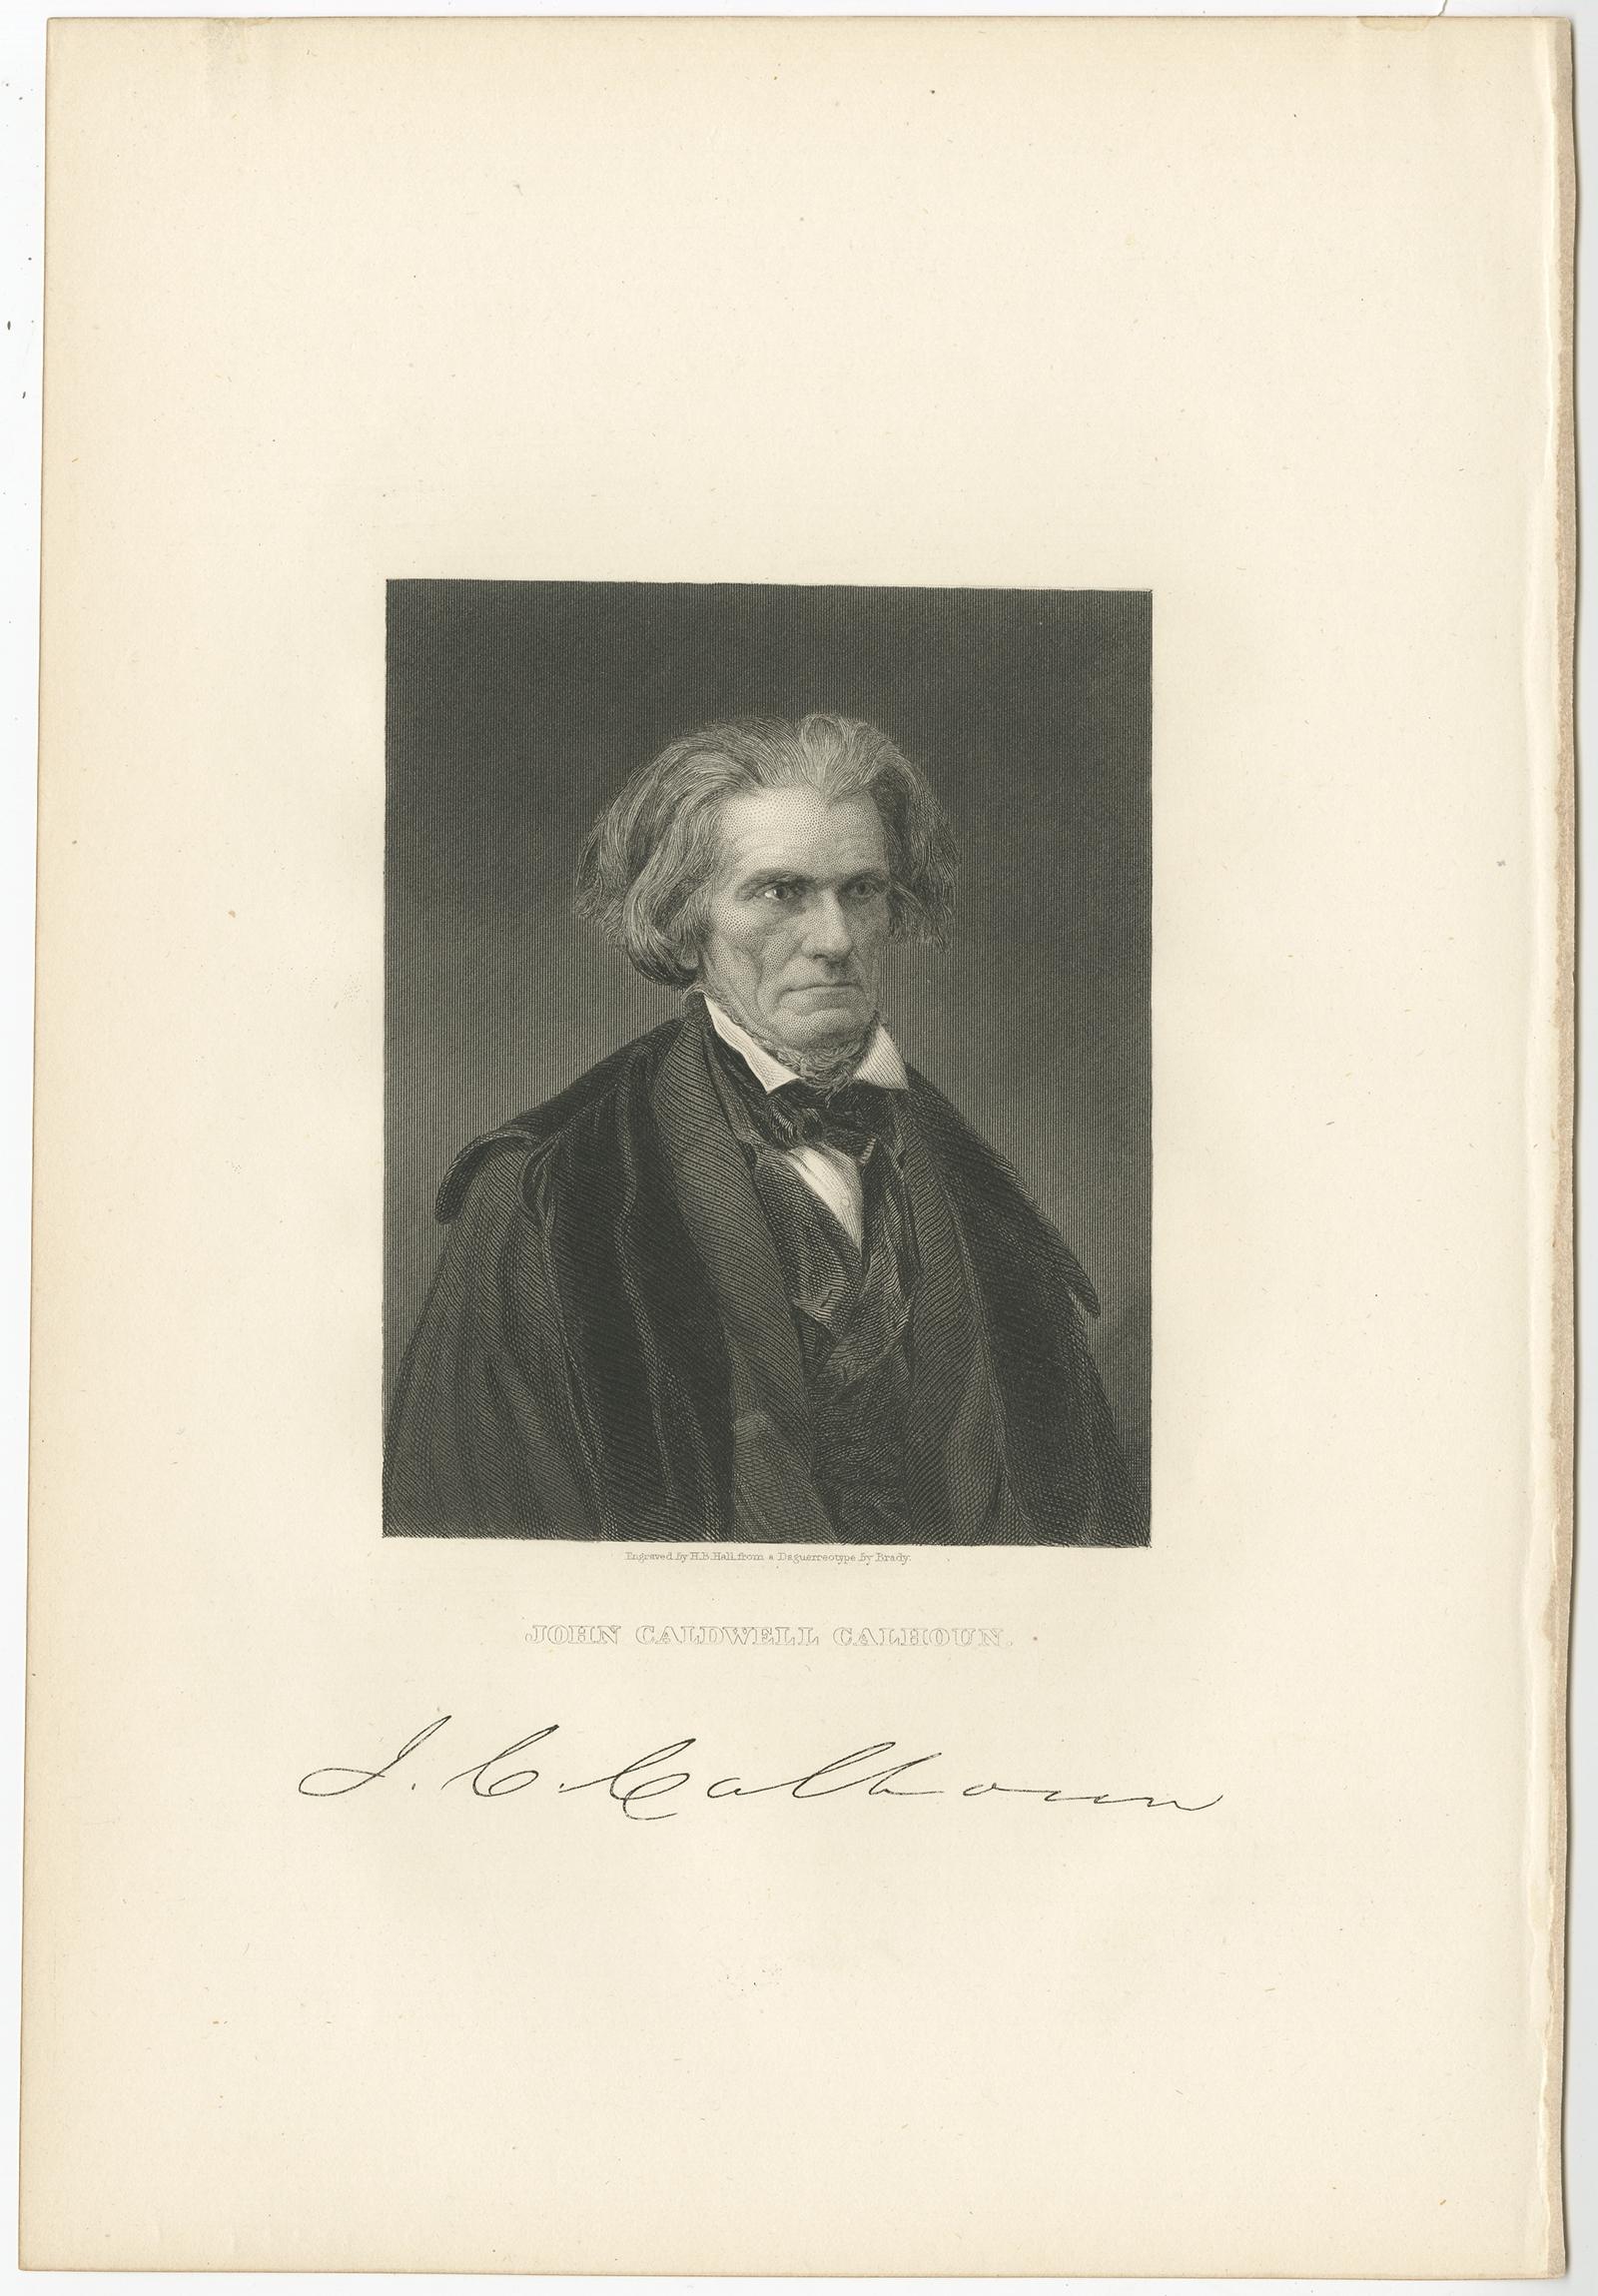 Antique print titled 'John Caldwell Calhoun'. 

Old portrait of John C. Calhoun. John Caldwell Calhoun was an American statesman from the Democratic party and political theorist from South Carolina who served as the seventh vice president of the